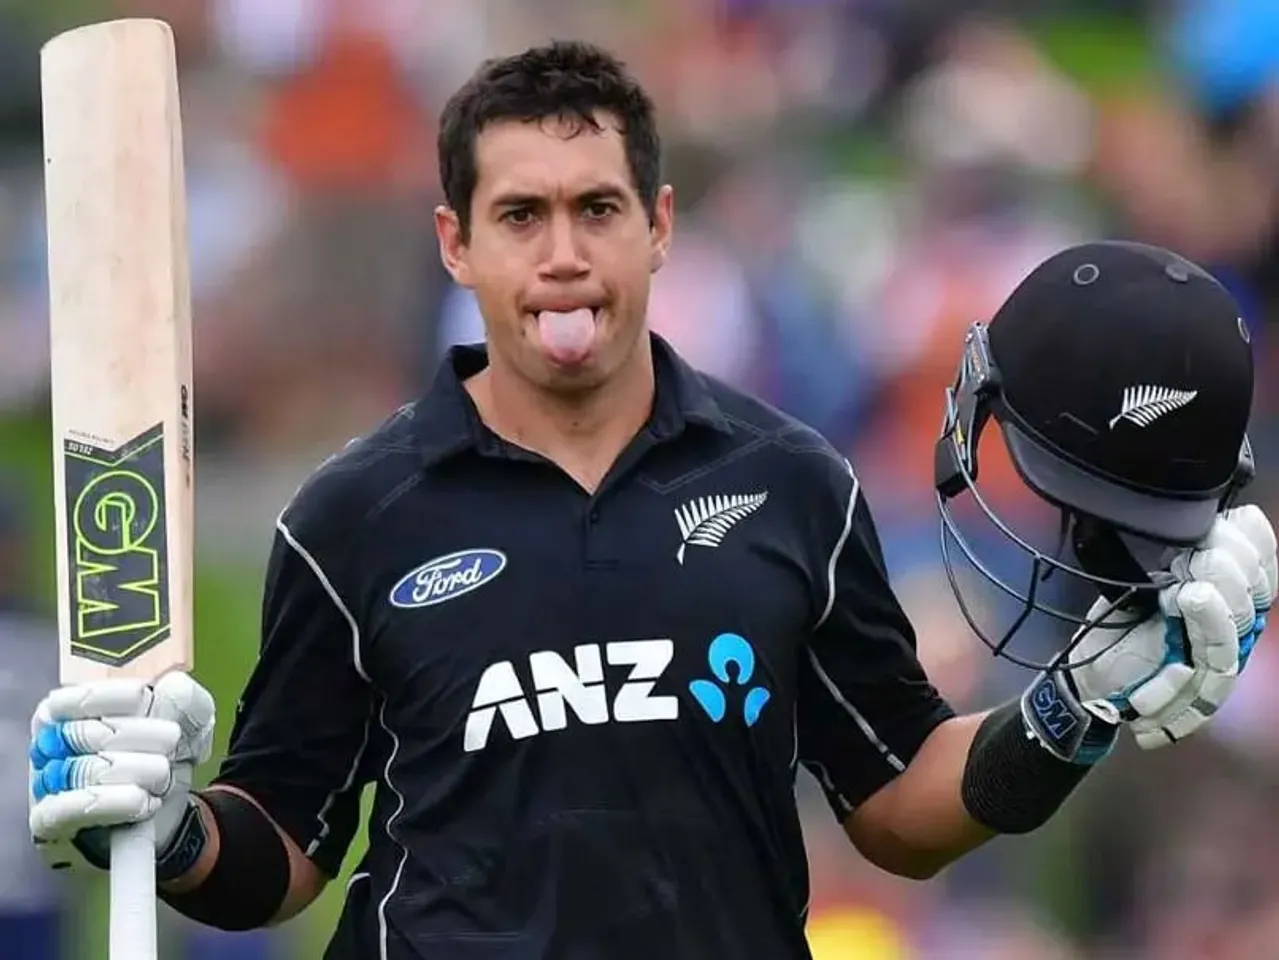 Ross Taylor accuses team officials of Racism in his new book | SportzPoint.com